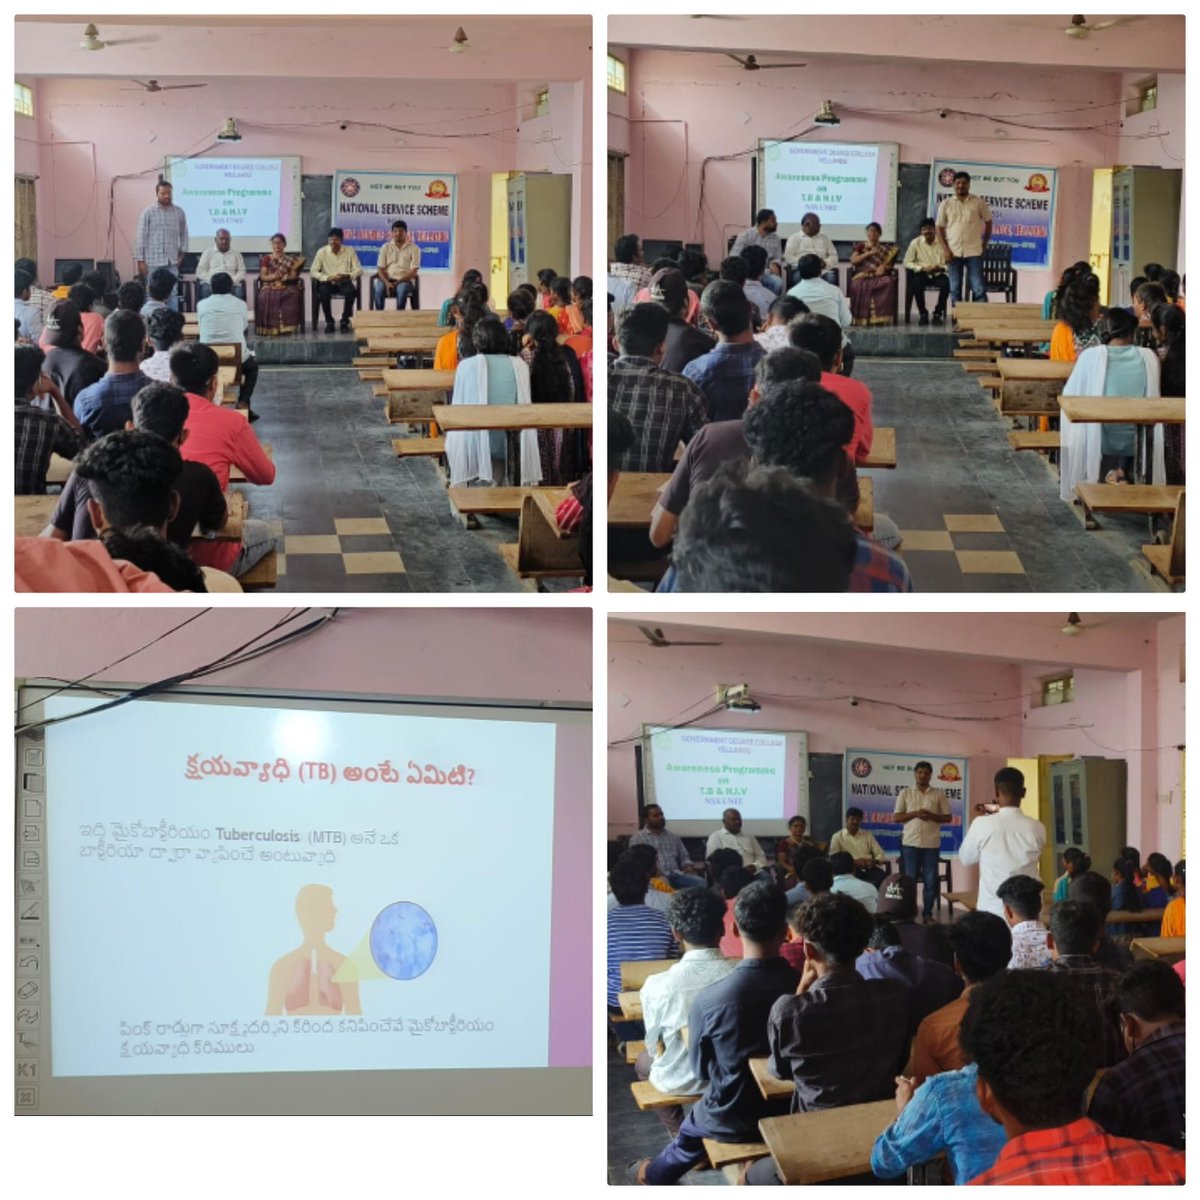 On 23.11.2023, #TUYellandu organized a TB awareness program under the direction of Principal Dr Padma of Government Degree College. Somaiah ACSM Coordinator #TB Symptoms, #Diagnosis, #TPT, #PMTBMBA, #NPY, IGRA Explained the importance of nutritionFood. NTEP  staff Paticipated.